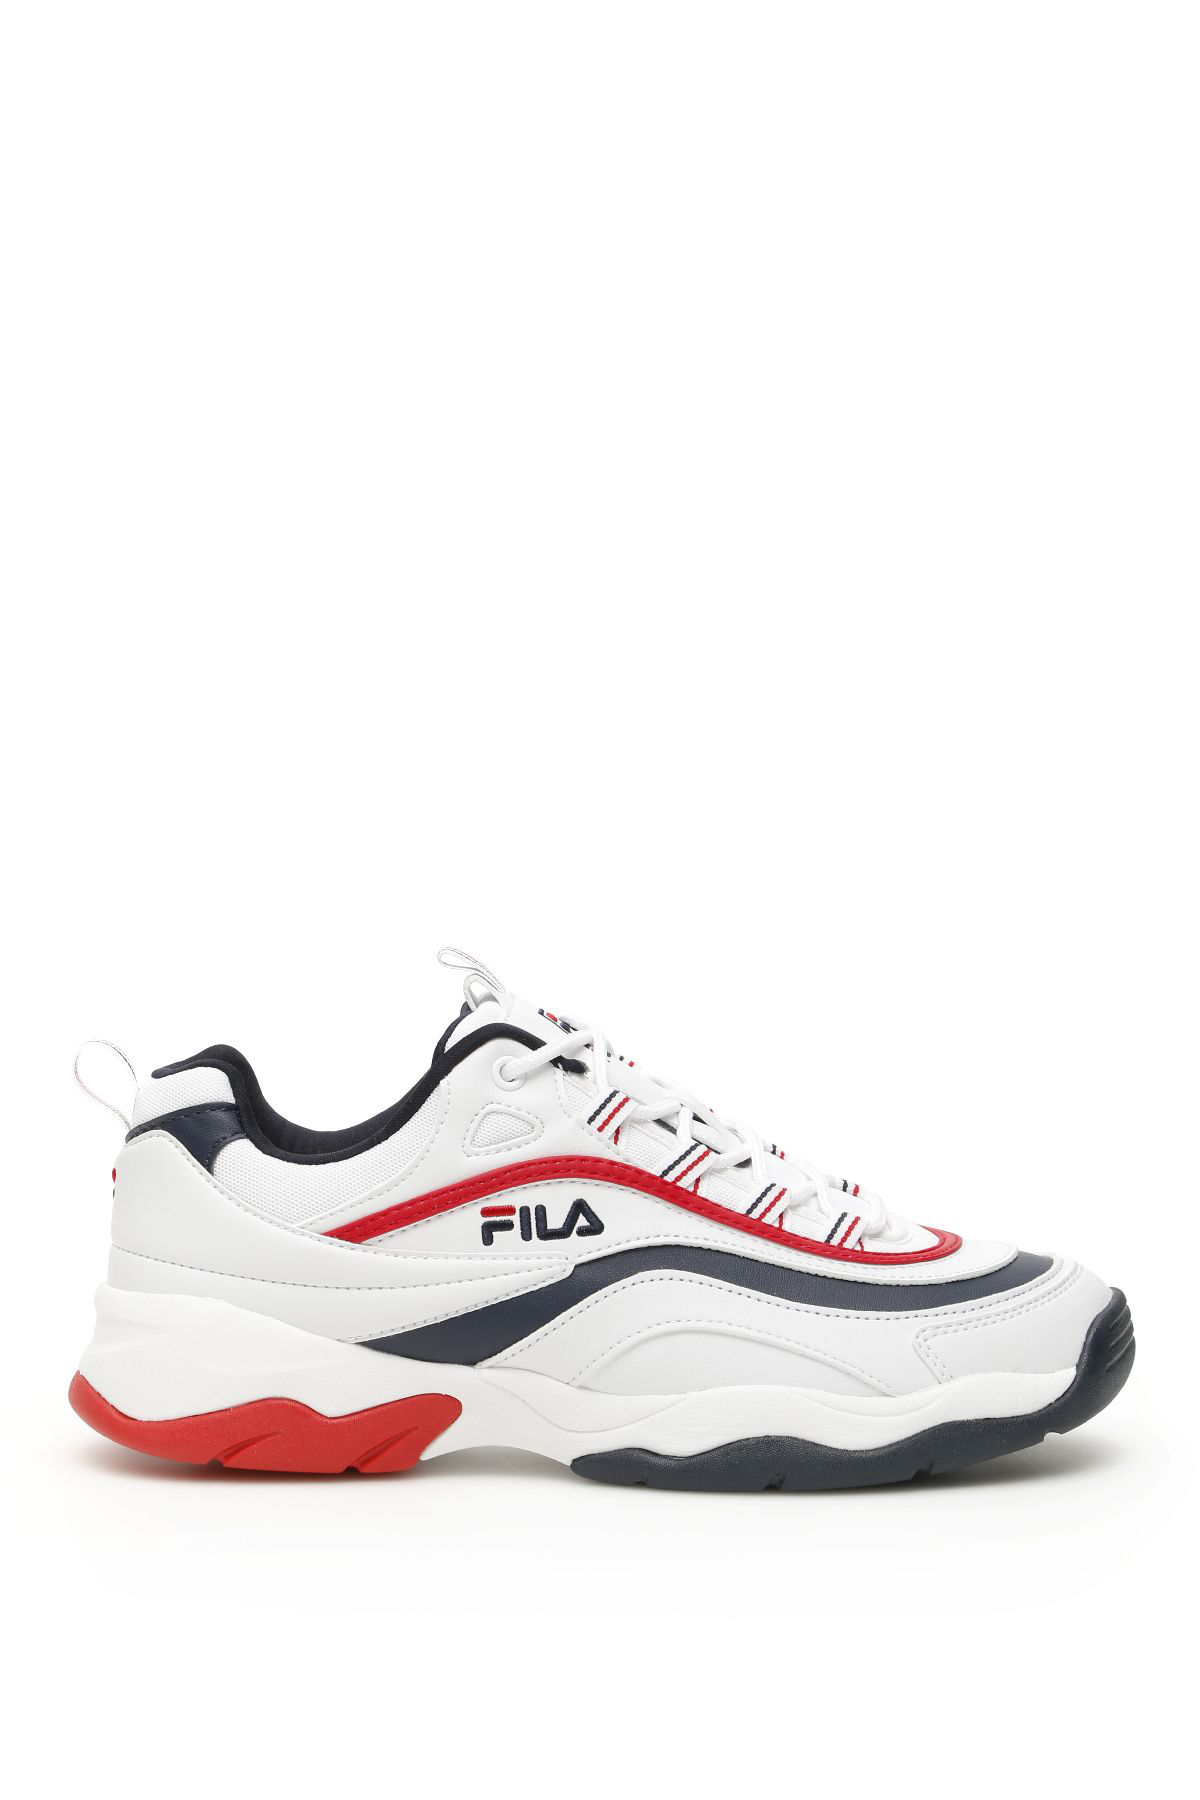 Fila Ray Low Sneakers In White Navy Red|bianco | ModeSens